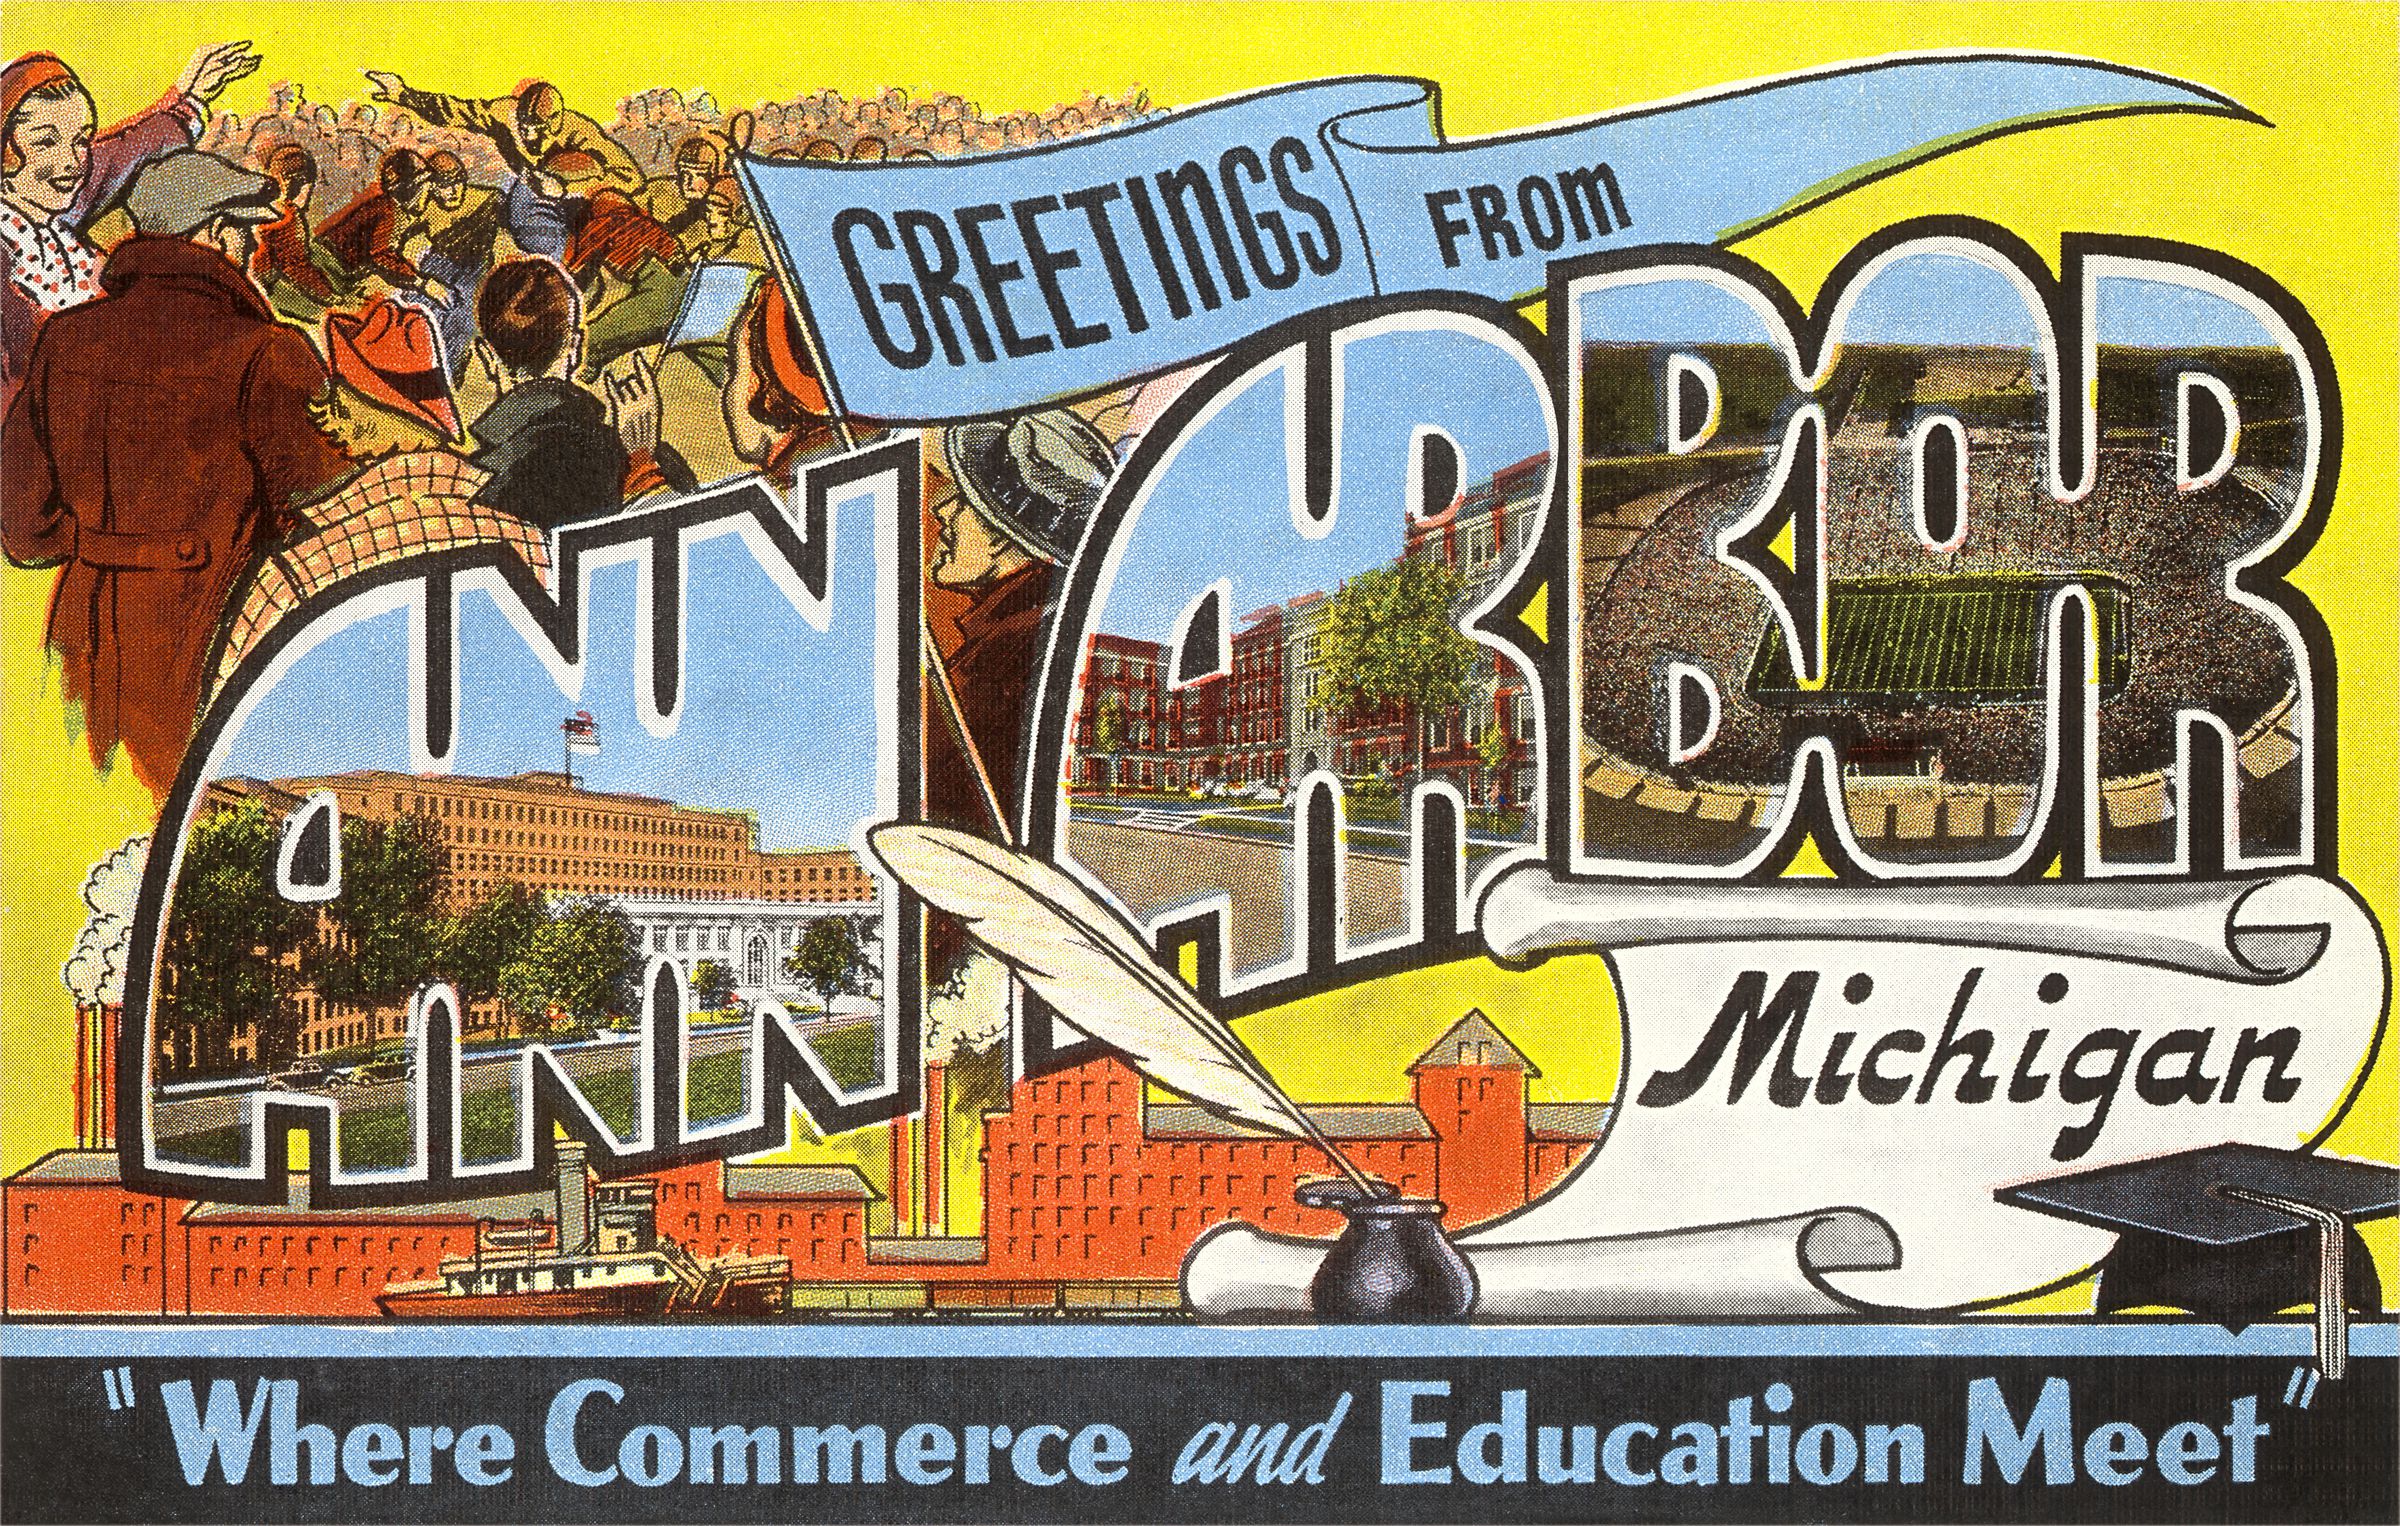 Greetings from Ann Arbor, Michigan, Where Commerce and Education Meet